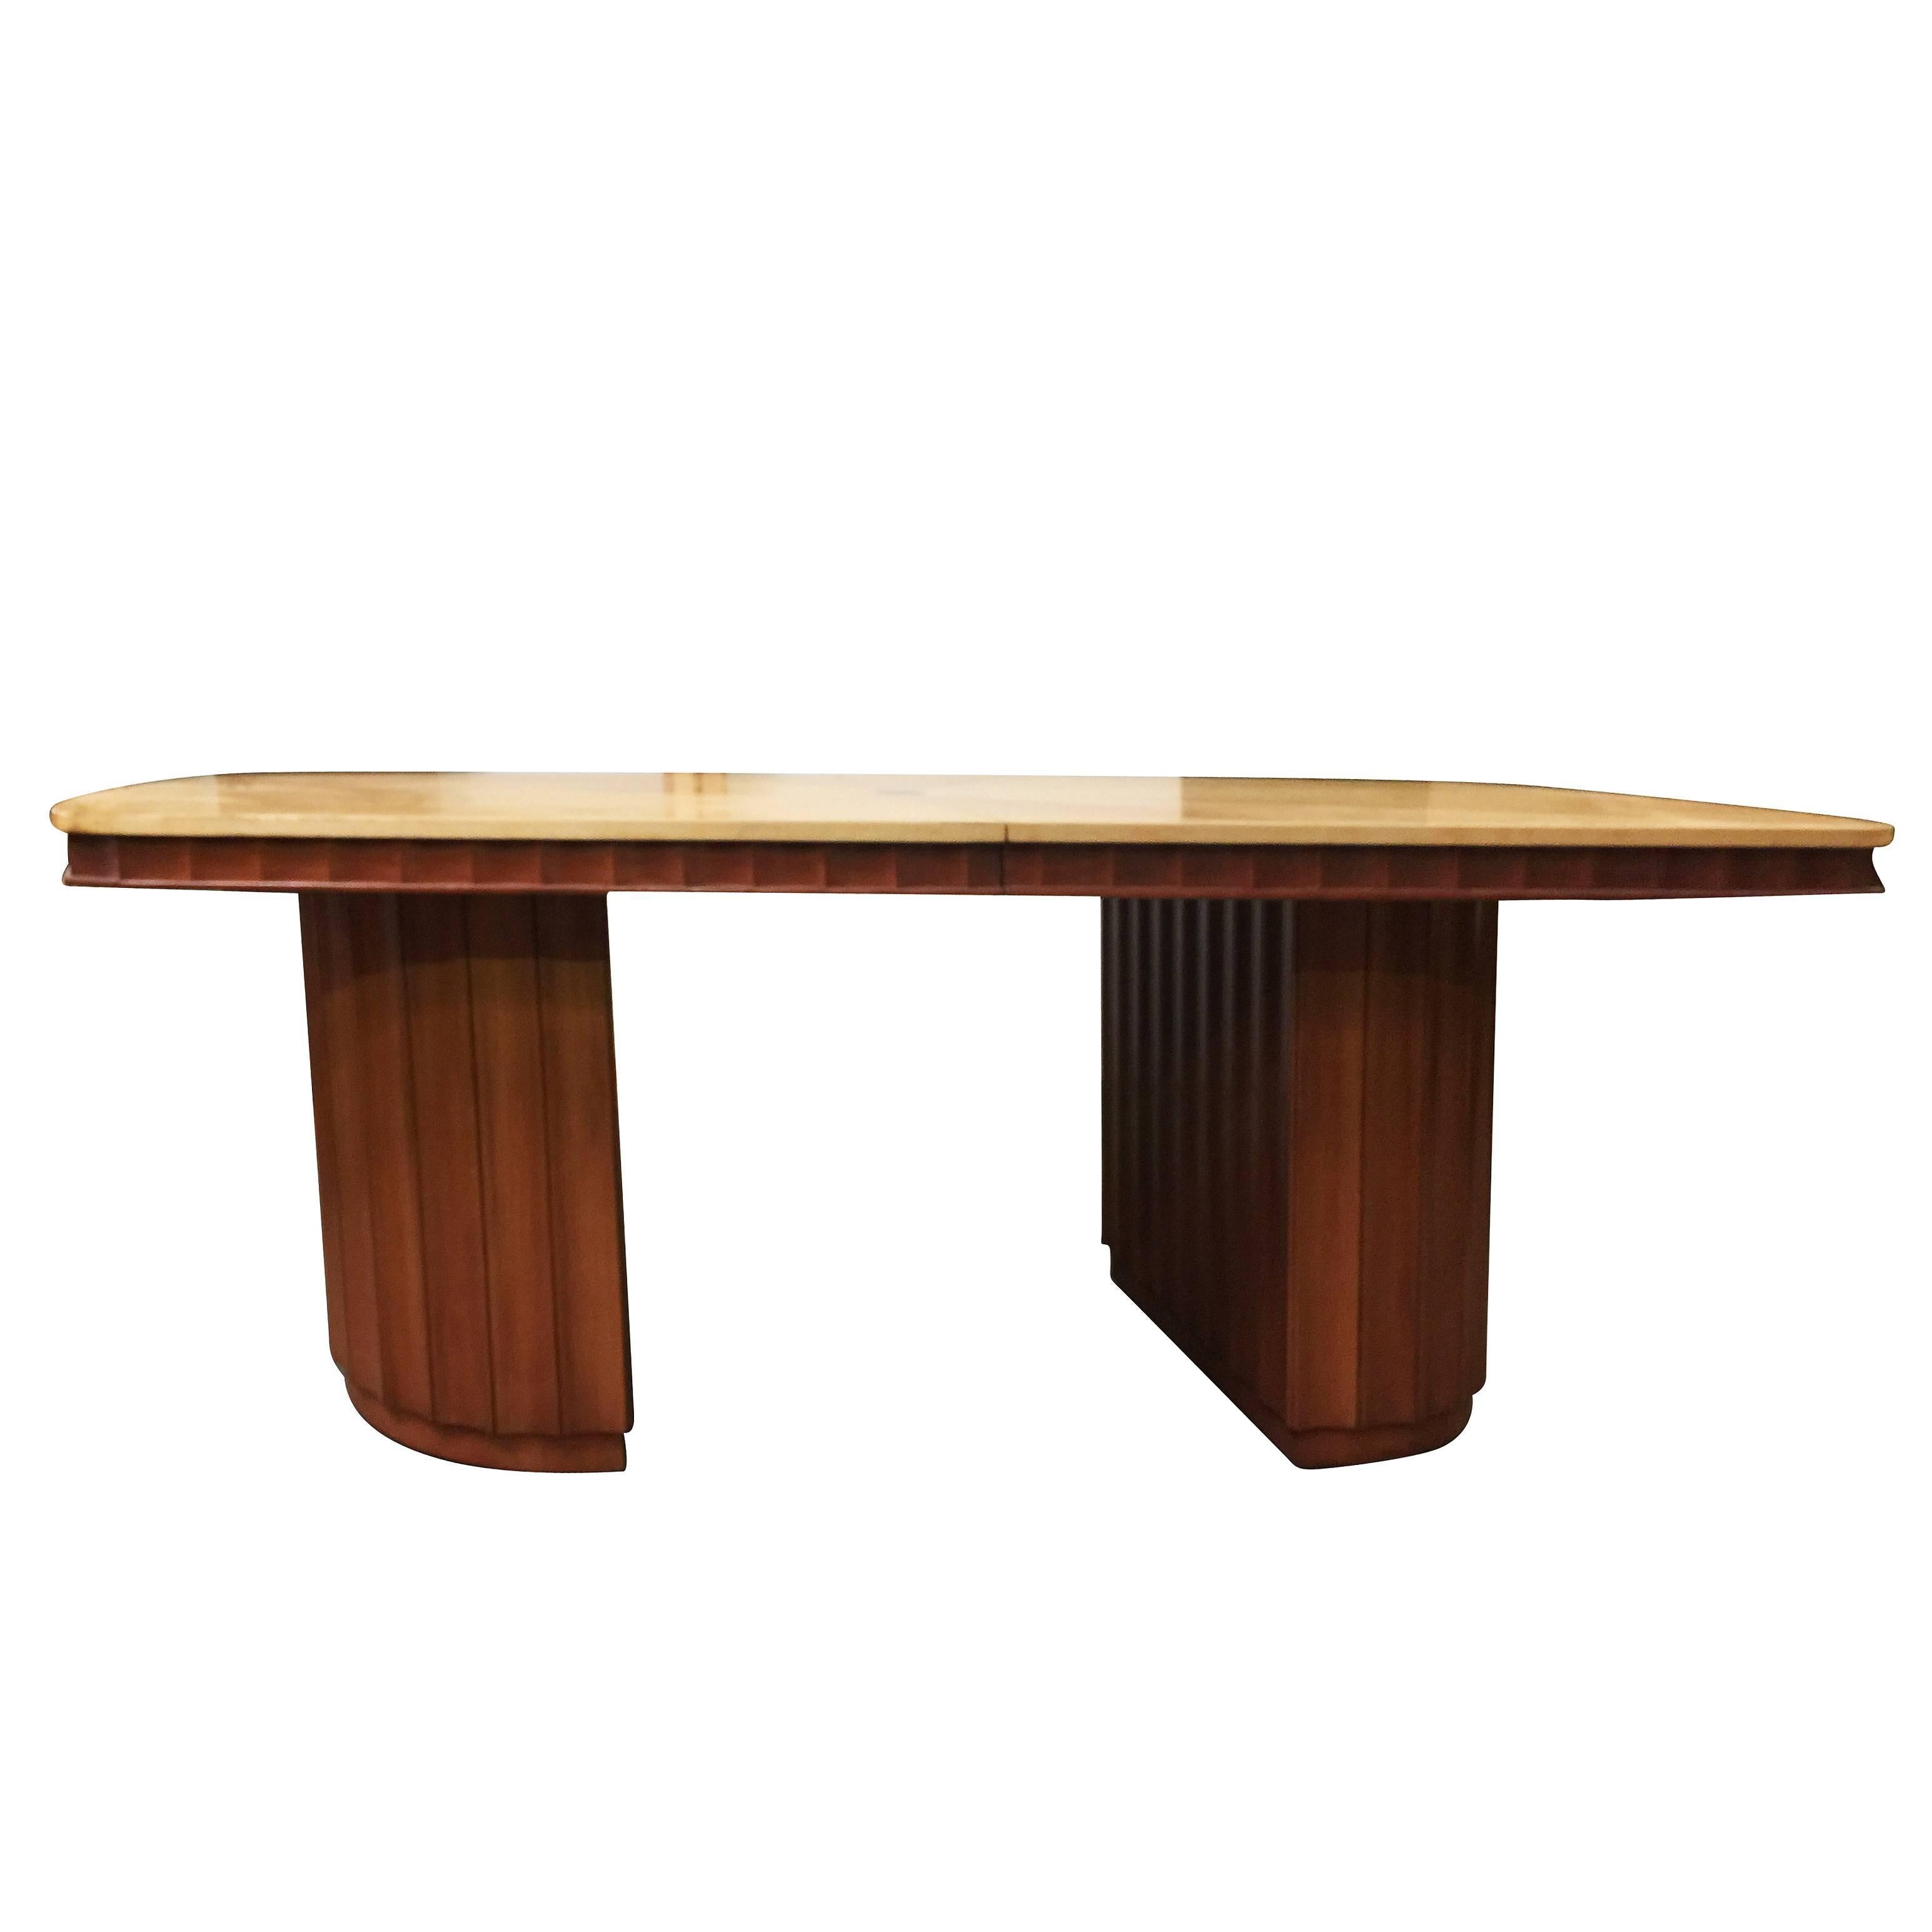 Mid-20th Century Eliel Saarinen Style Dining Table with Sculpted Bases and Inlay Top For Sale